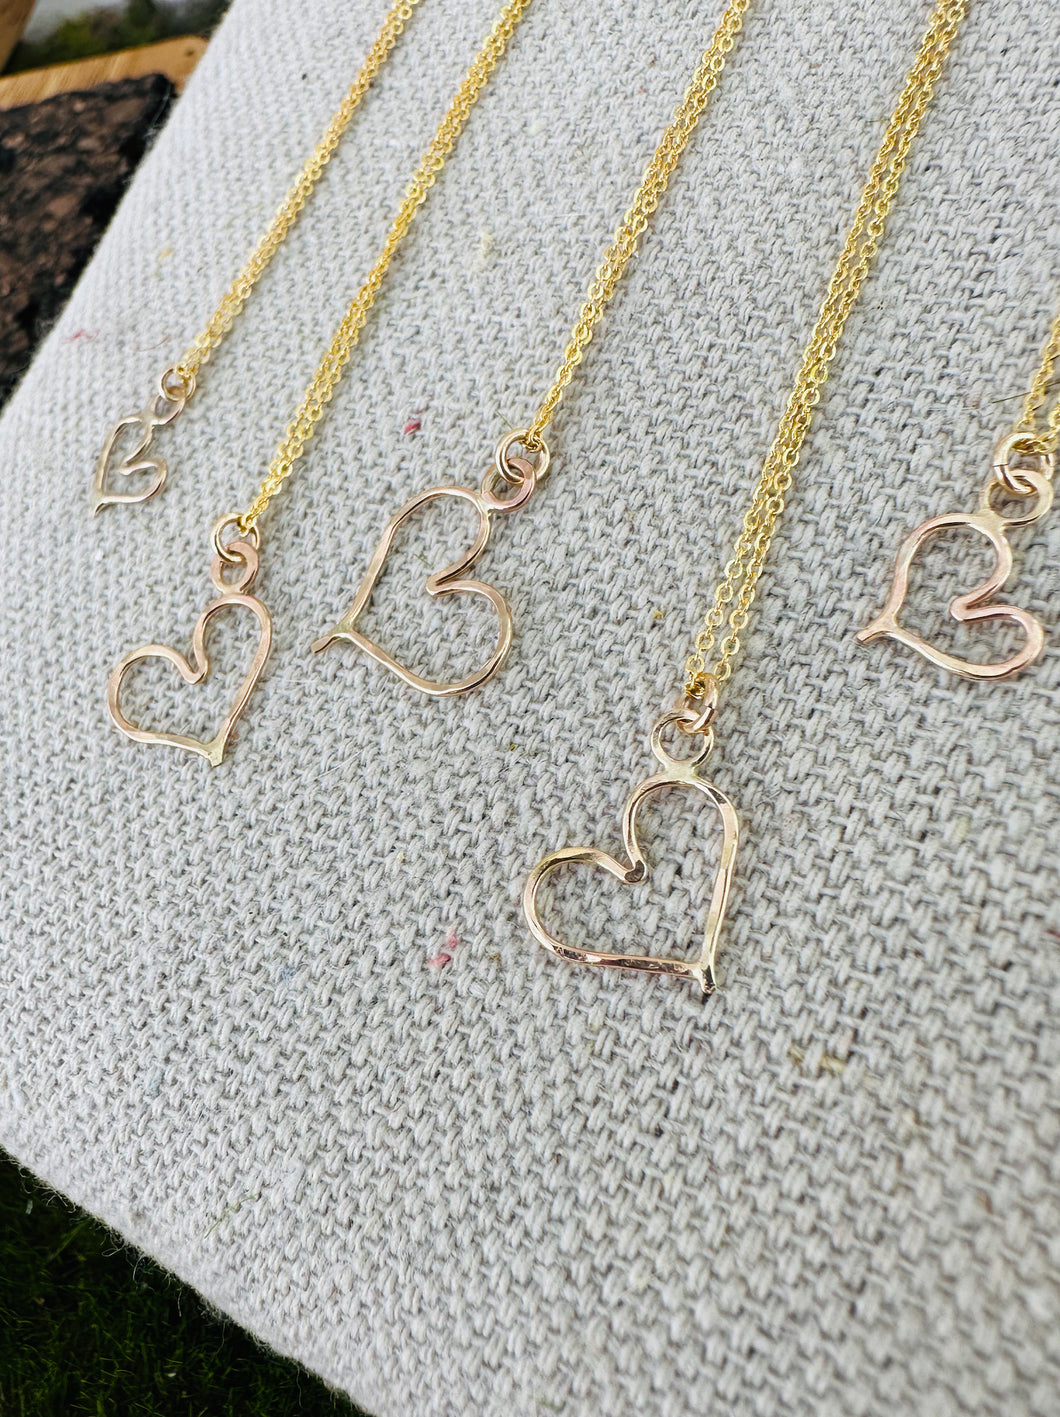 Sweetheart Necklaces ~ 14k Gold Fill